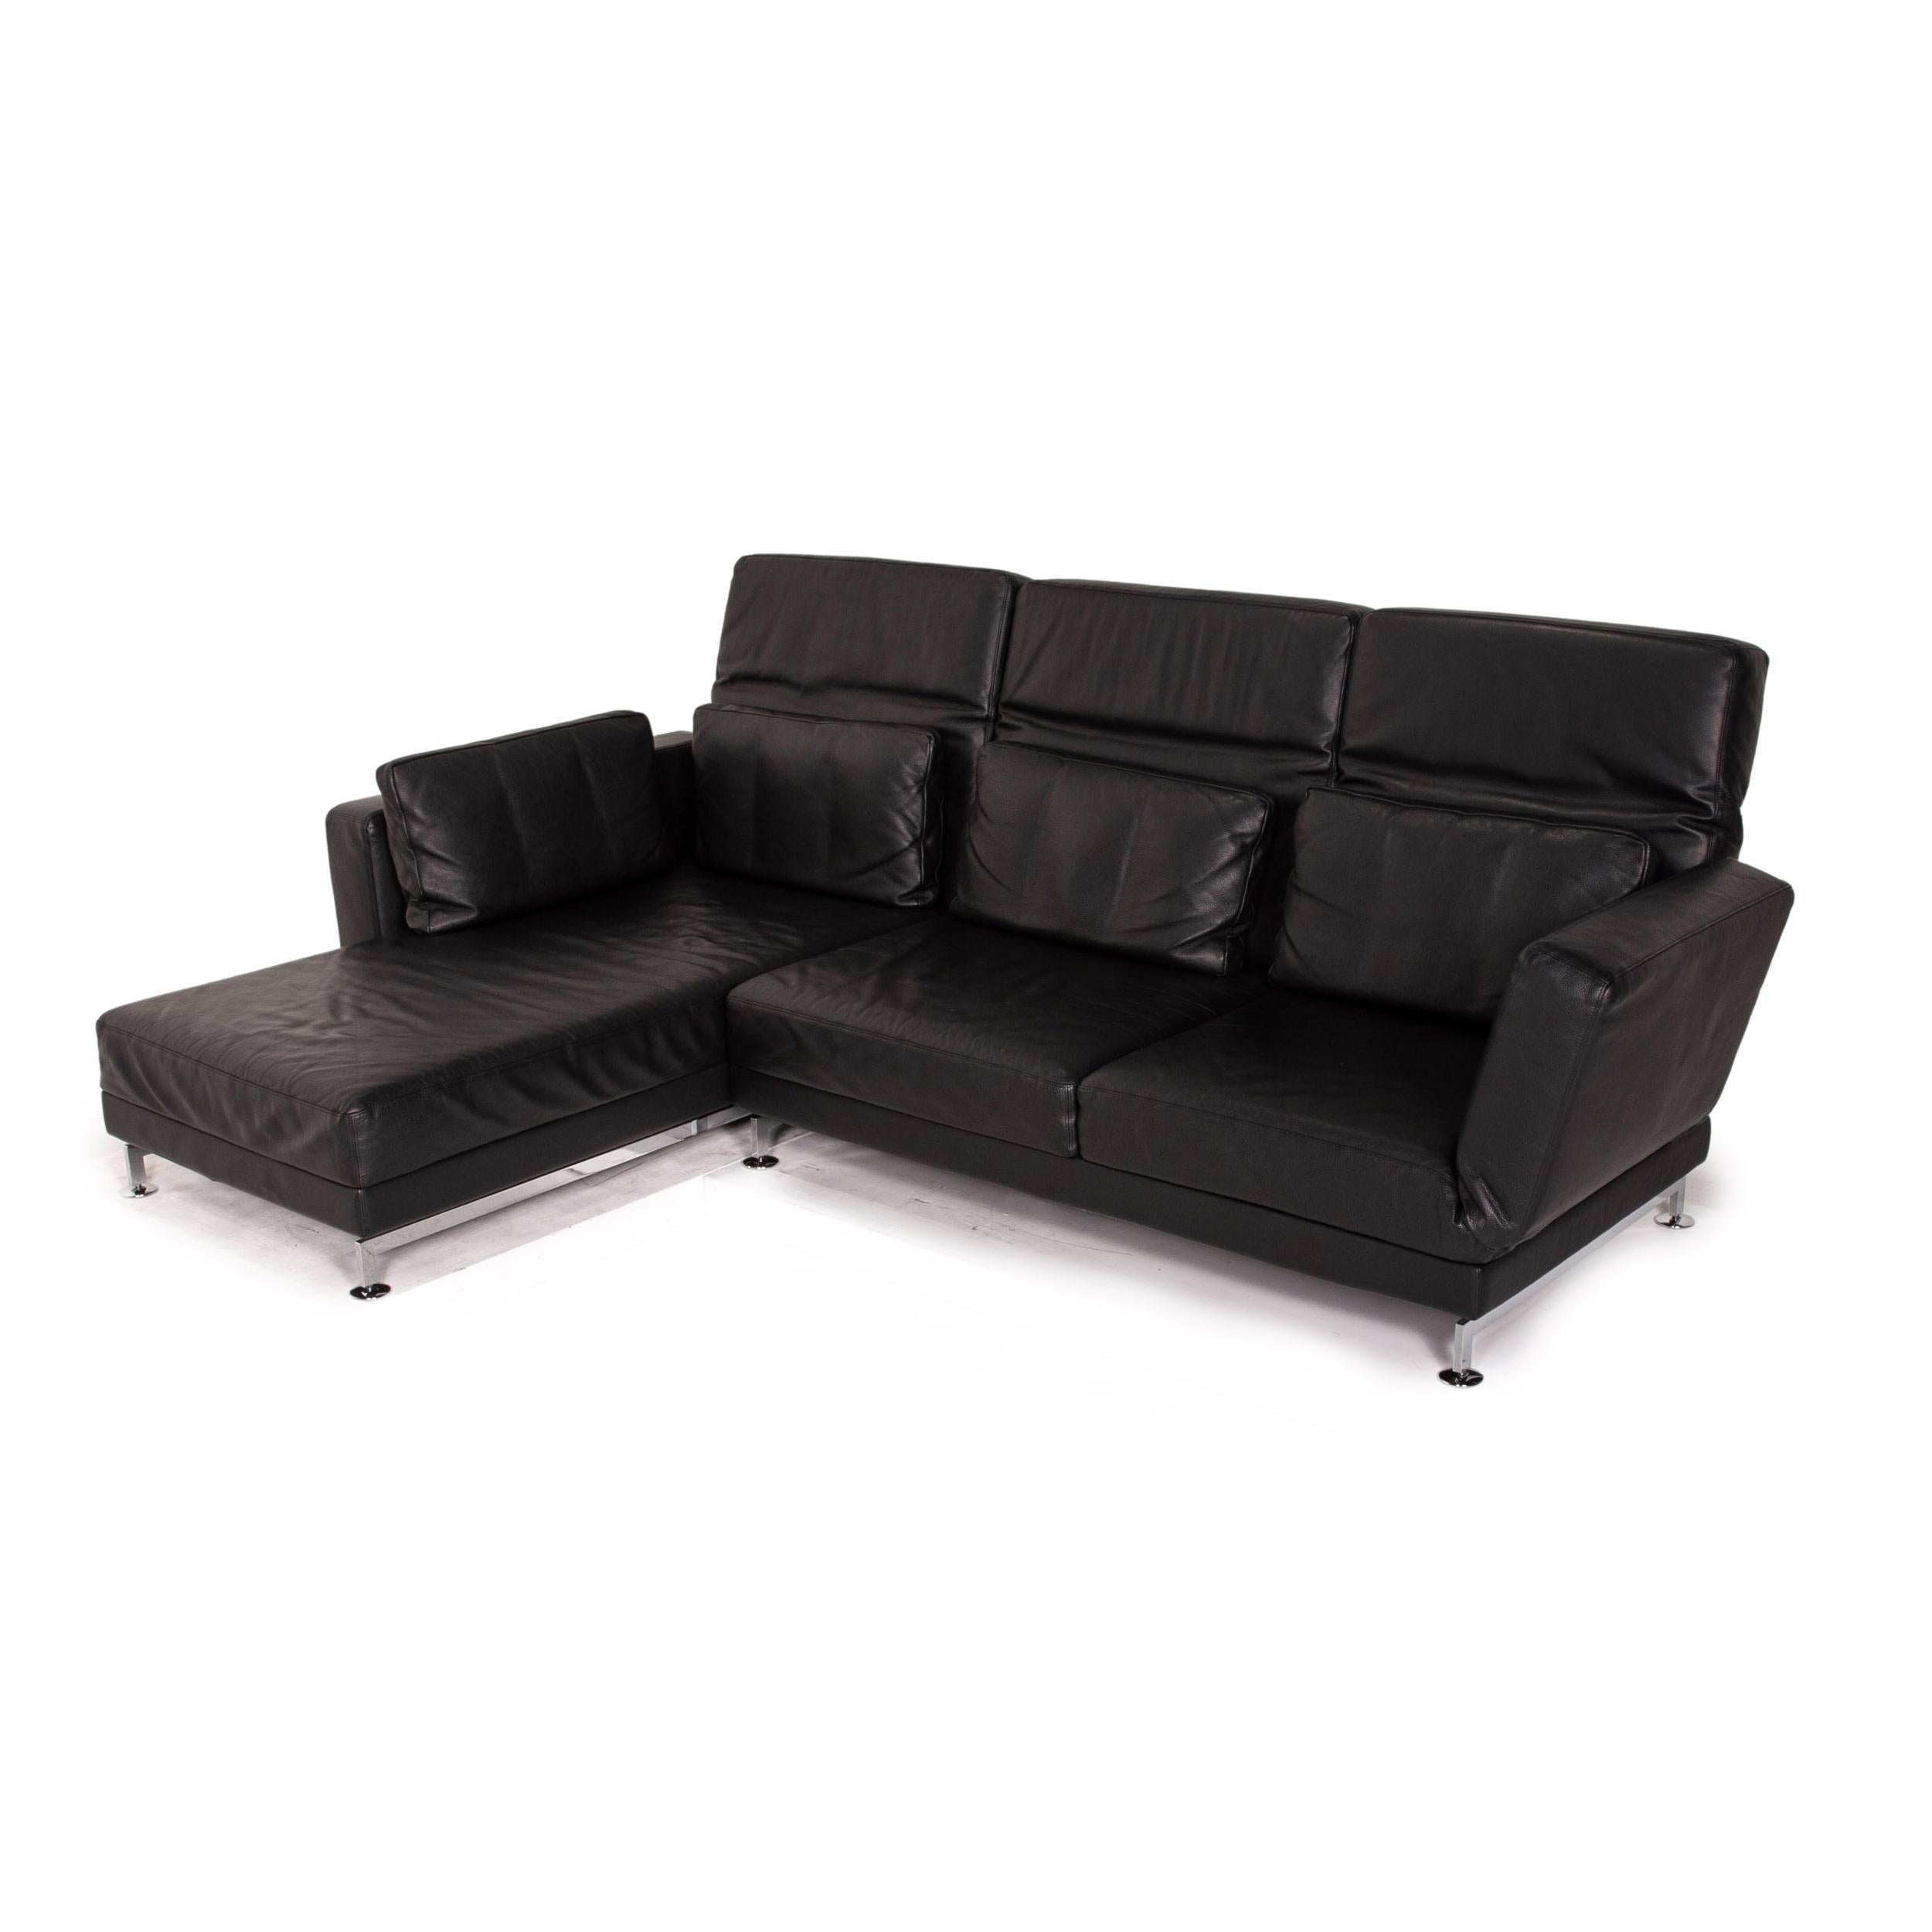 Brühl & Sippold Moule Leather Corner Sofa Black Function Relax Function Couch 4